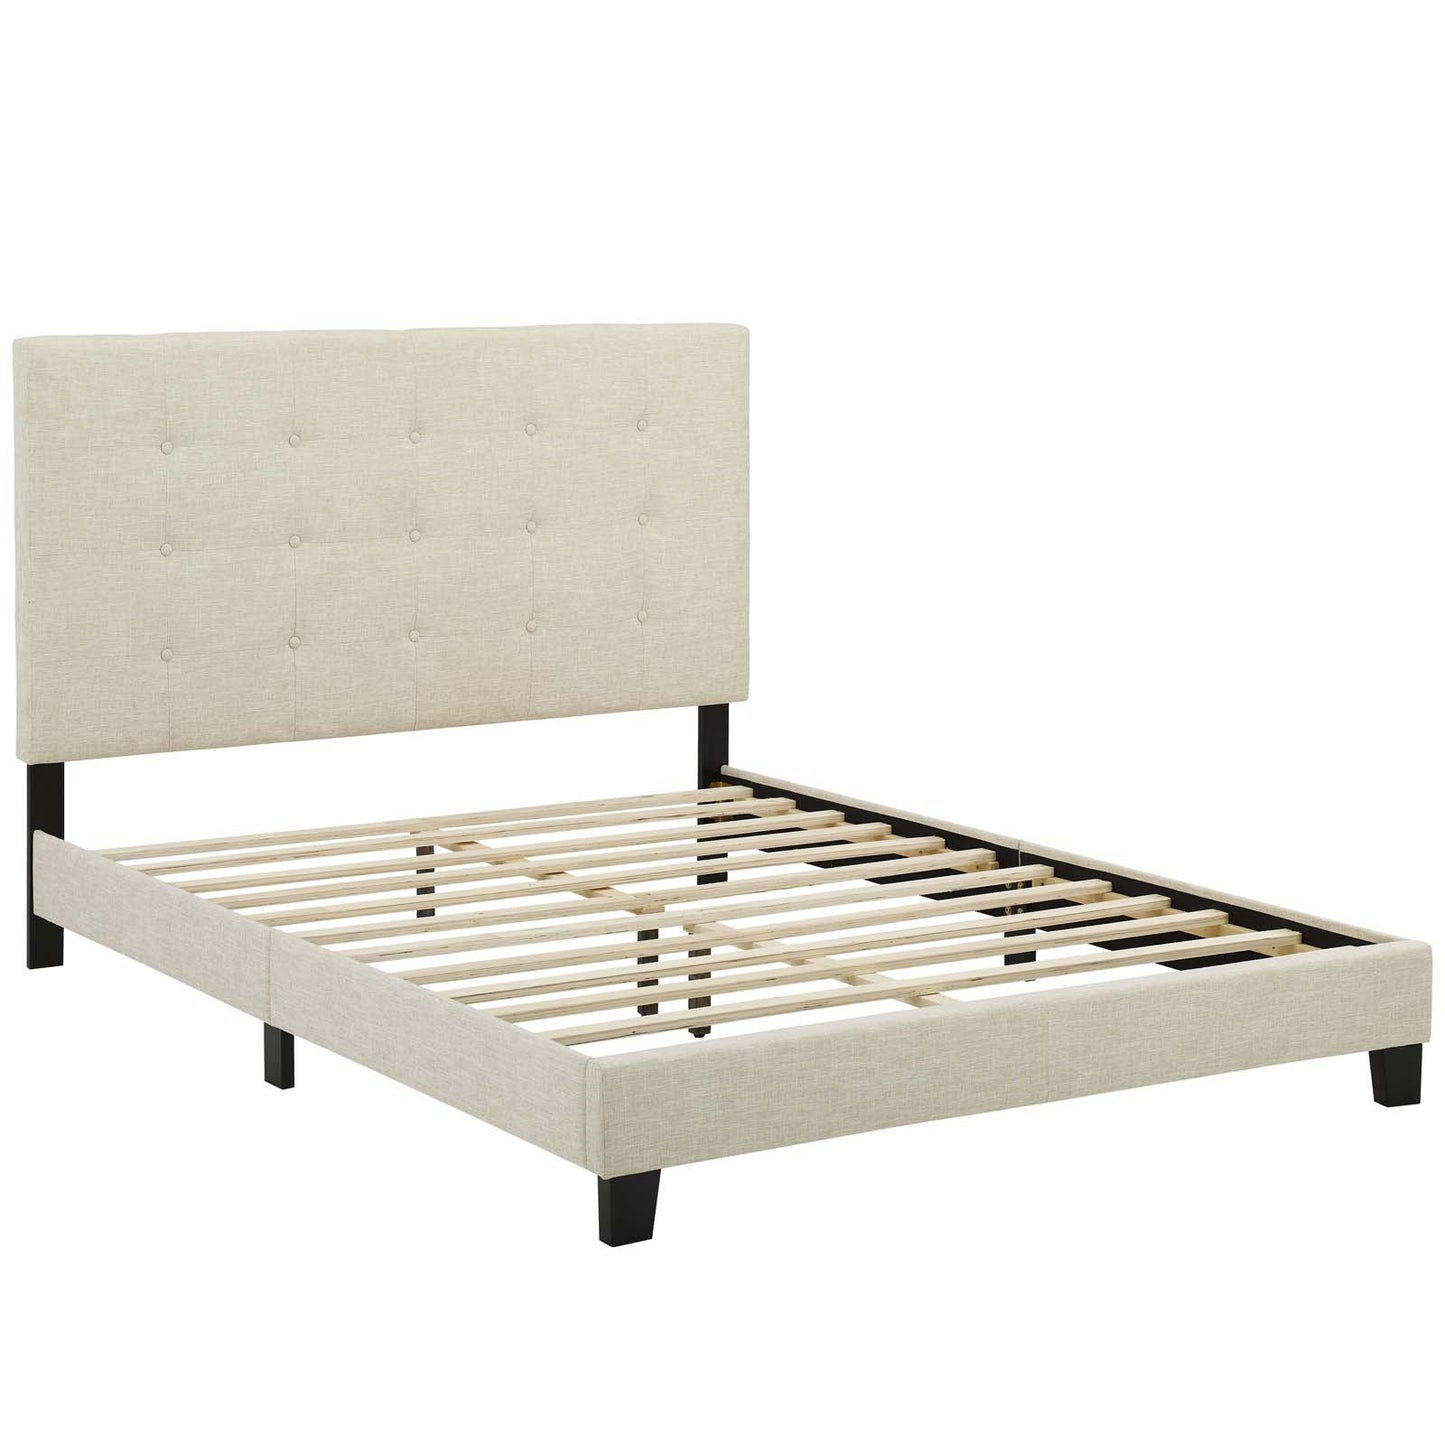 Melanie Full Tufted Button Upholstered Fabric Platform Bed Beige MOD-5878-BEI